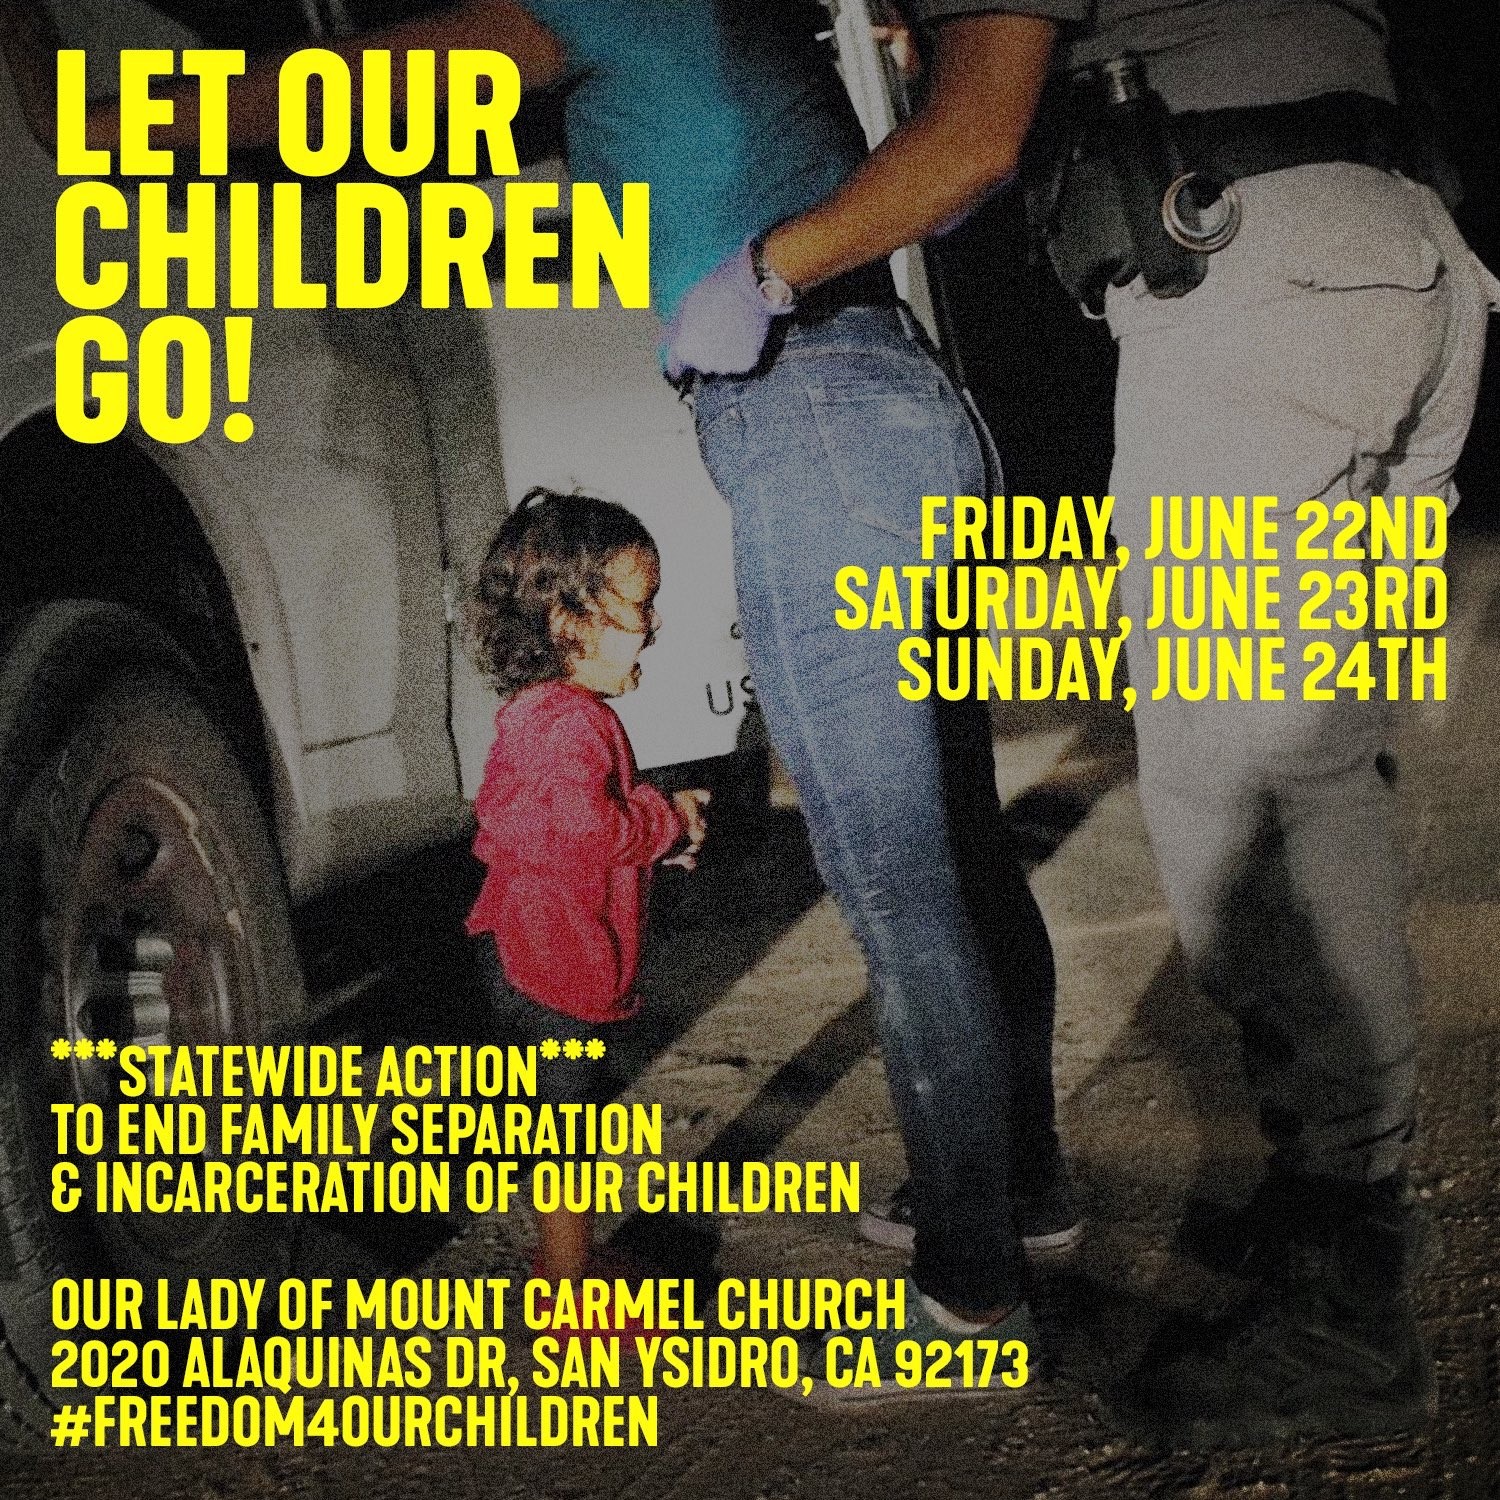 Let Our Children Go! A Weekend of Action to End Family Separation